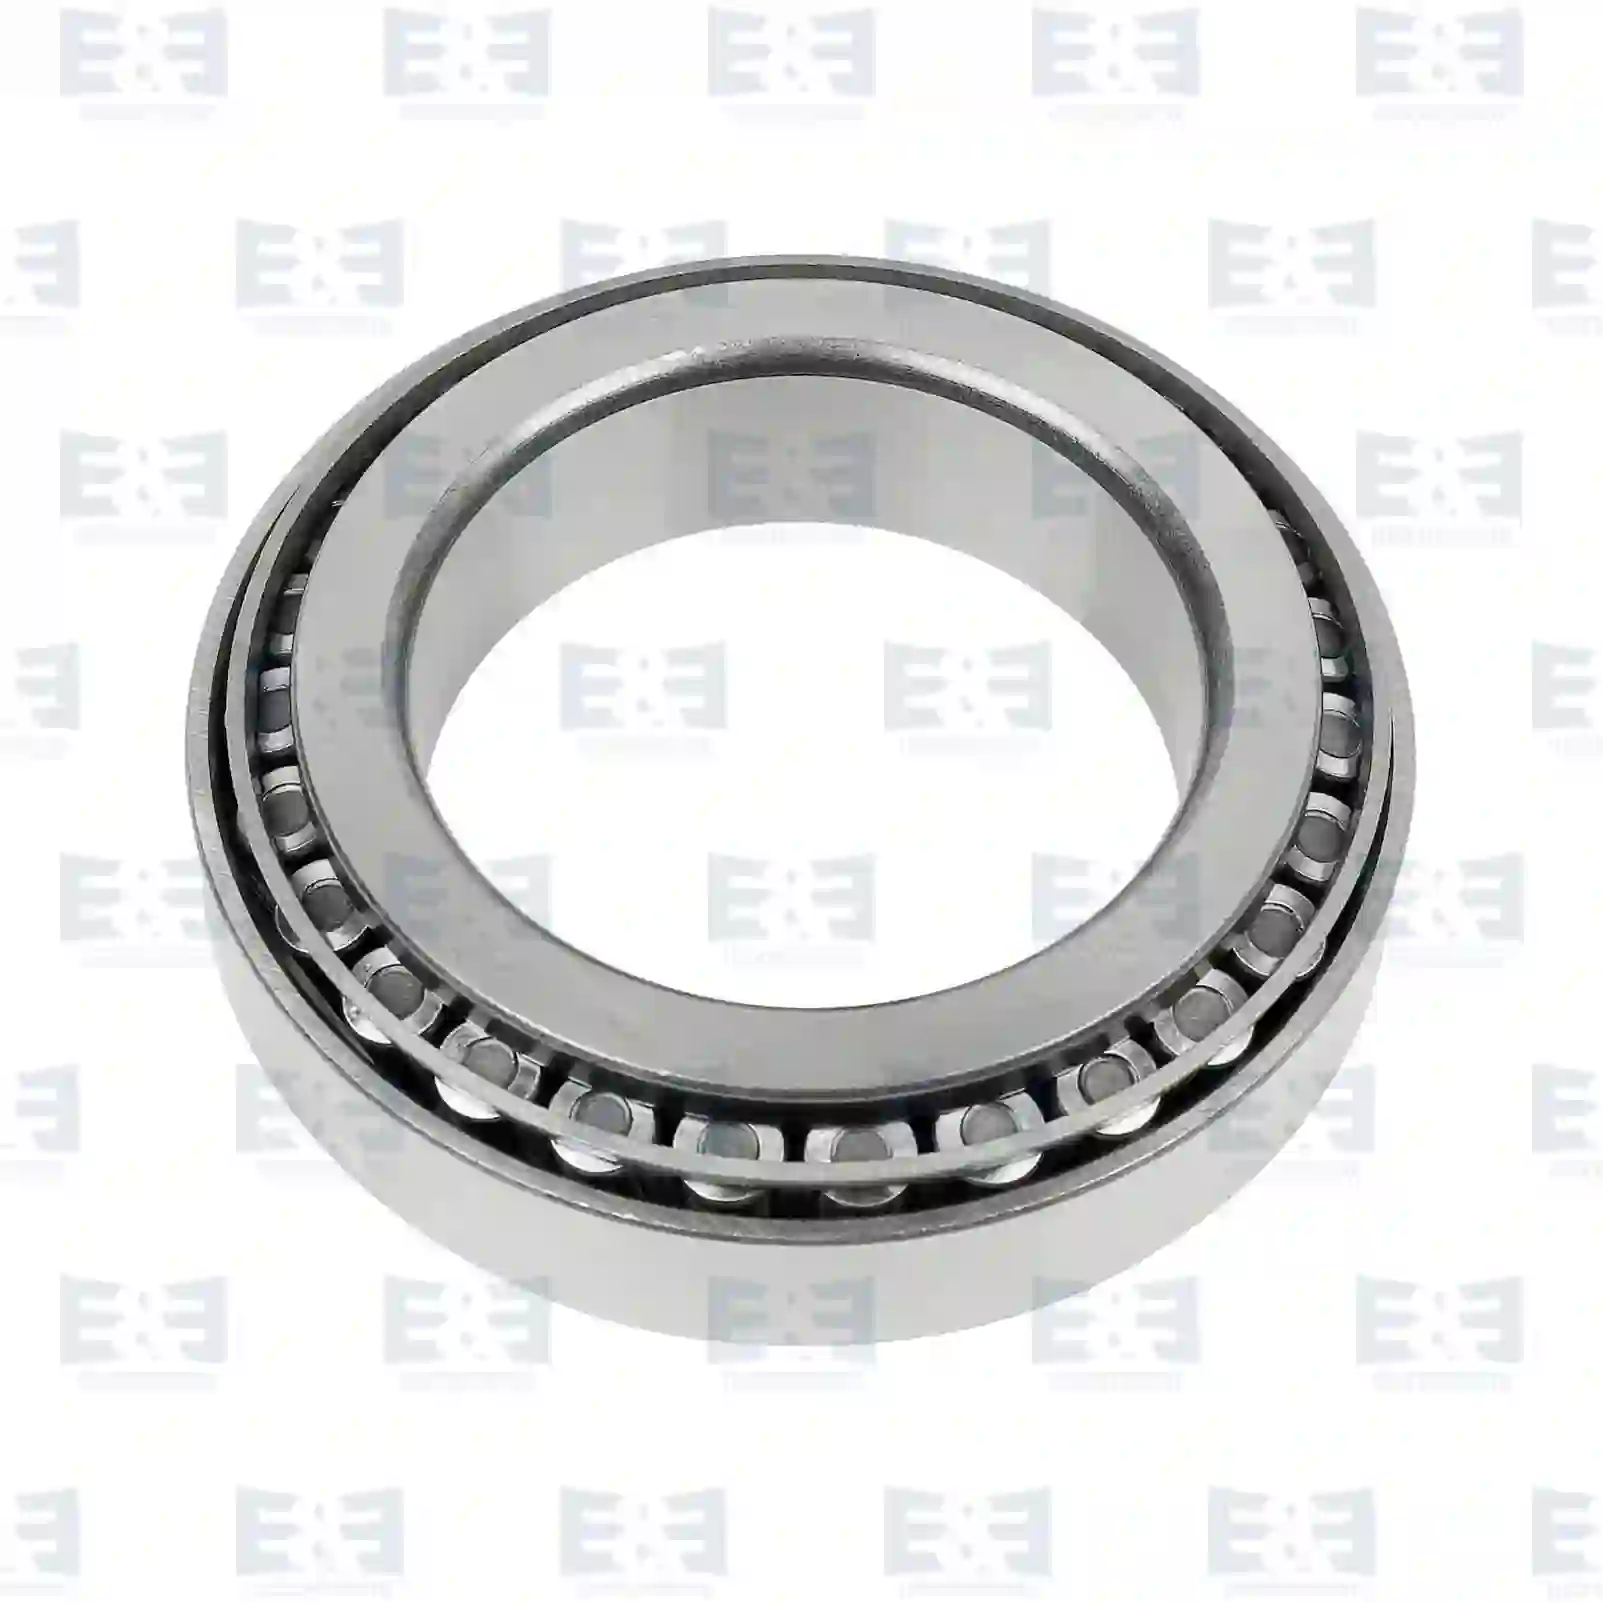 Tapered roller bearing, 2E2286210, 000237117, 07164410, 01905216, 07164410, 07172769, 3612906900, 60187186, 7164410, 3007445X1, 06324890128, 000720032014, 0059816605, 0059816805, 0059819505, 0059819805, 0069816805, 0179817205, 0179818005, 38440-21X00, 0023336034, 5000287980, 969300701, 184621, 969300701, ZG03015-0008 ||  2E2286210 E&E Truck Spare Parts | Truck Spare Parts, Auotomotive Spare Parts Tapered roller bearing, 2E2286210, 000237117, 07164410, 01905216, 07164410, 07172769, 3612906900, 60187186, 7164410, 3007445X1, 06324890128, 000720032014, 0059816605, 0059816805, 0059819505, 0059819805, 0069816805, 0179817205, 0179818005, 38440-21X00, 0023336034, 5000287980, 969300701, 184621, 969300701, ZG03015-0008 ||  2E2286210 E&E Truck Spare Parts | Truck Spare Parts, Auotomotive Spare Parts